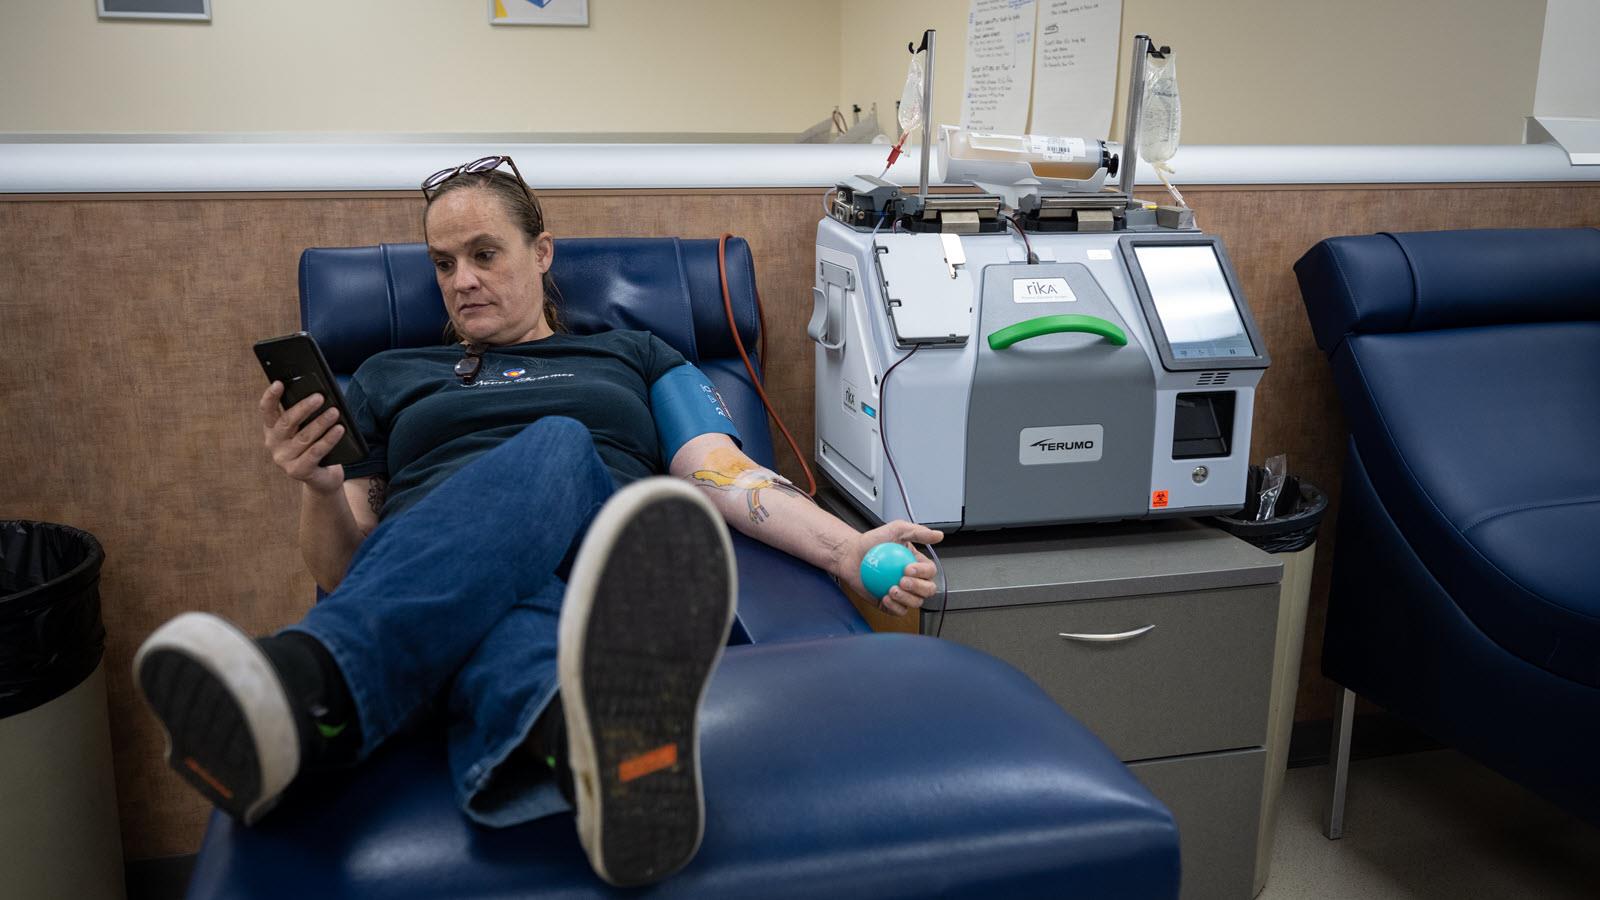 Kelly Geiser looks at her phone while donating plasma at a CSL Plasma Center.